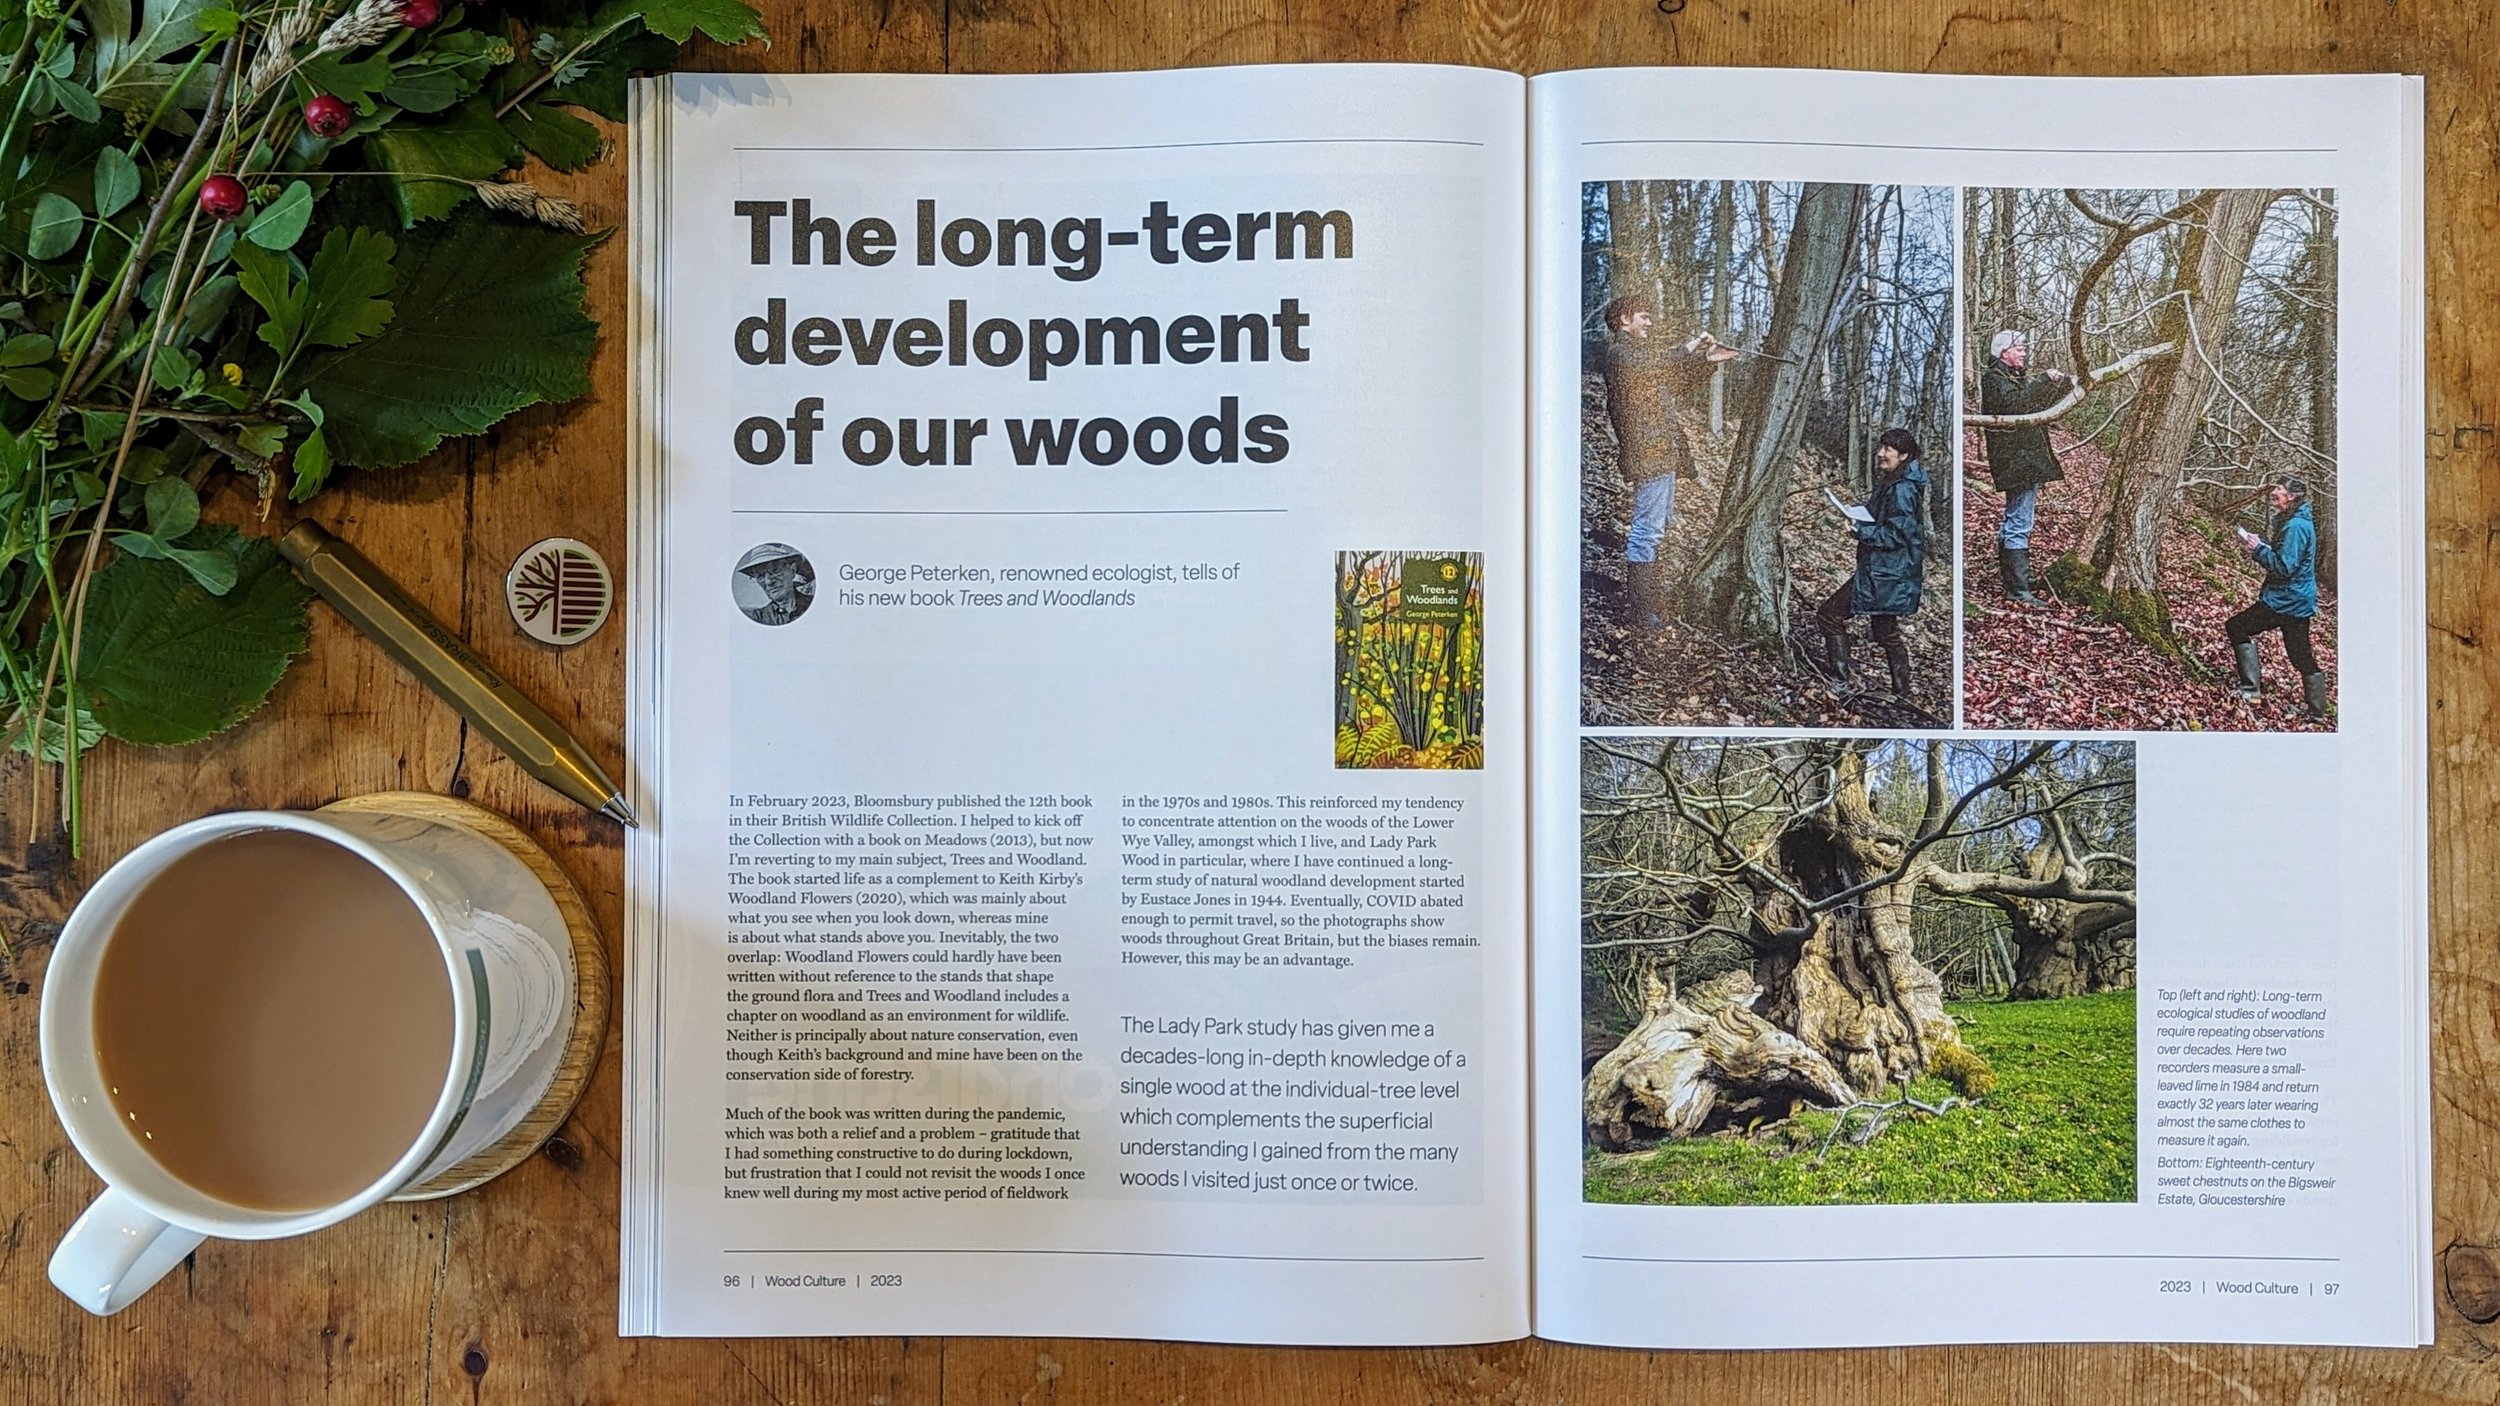 5 'Wood Culture' The Journal of Woodland Heritage - 5.jpg